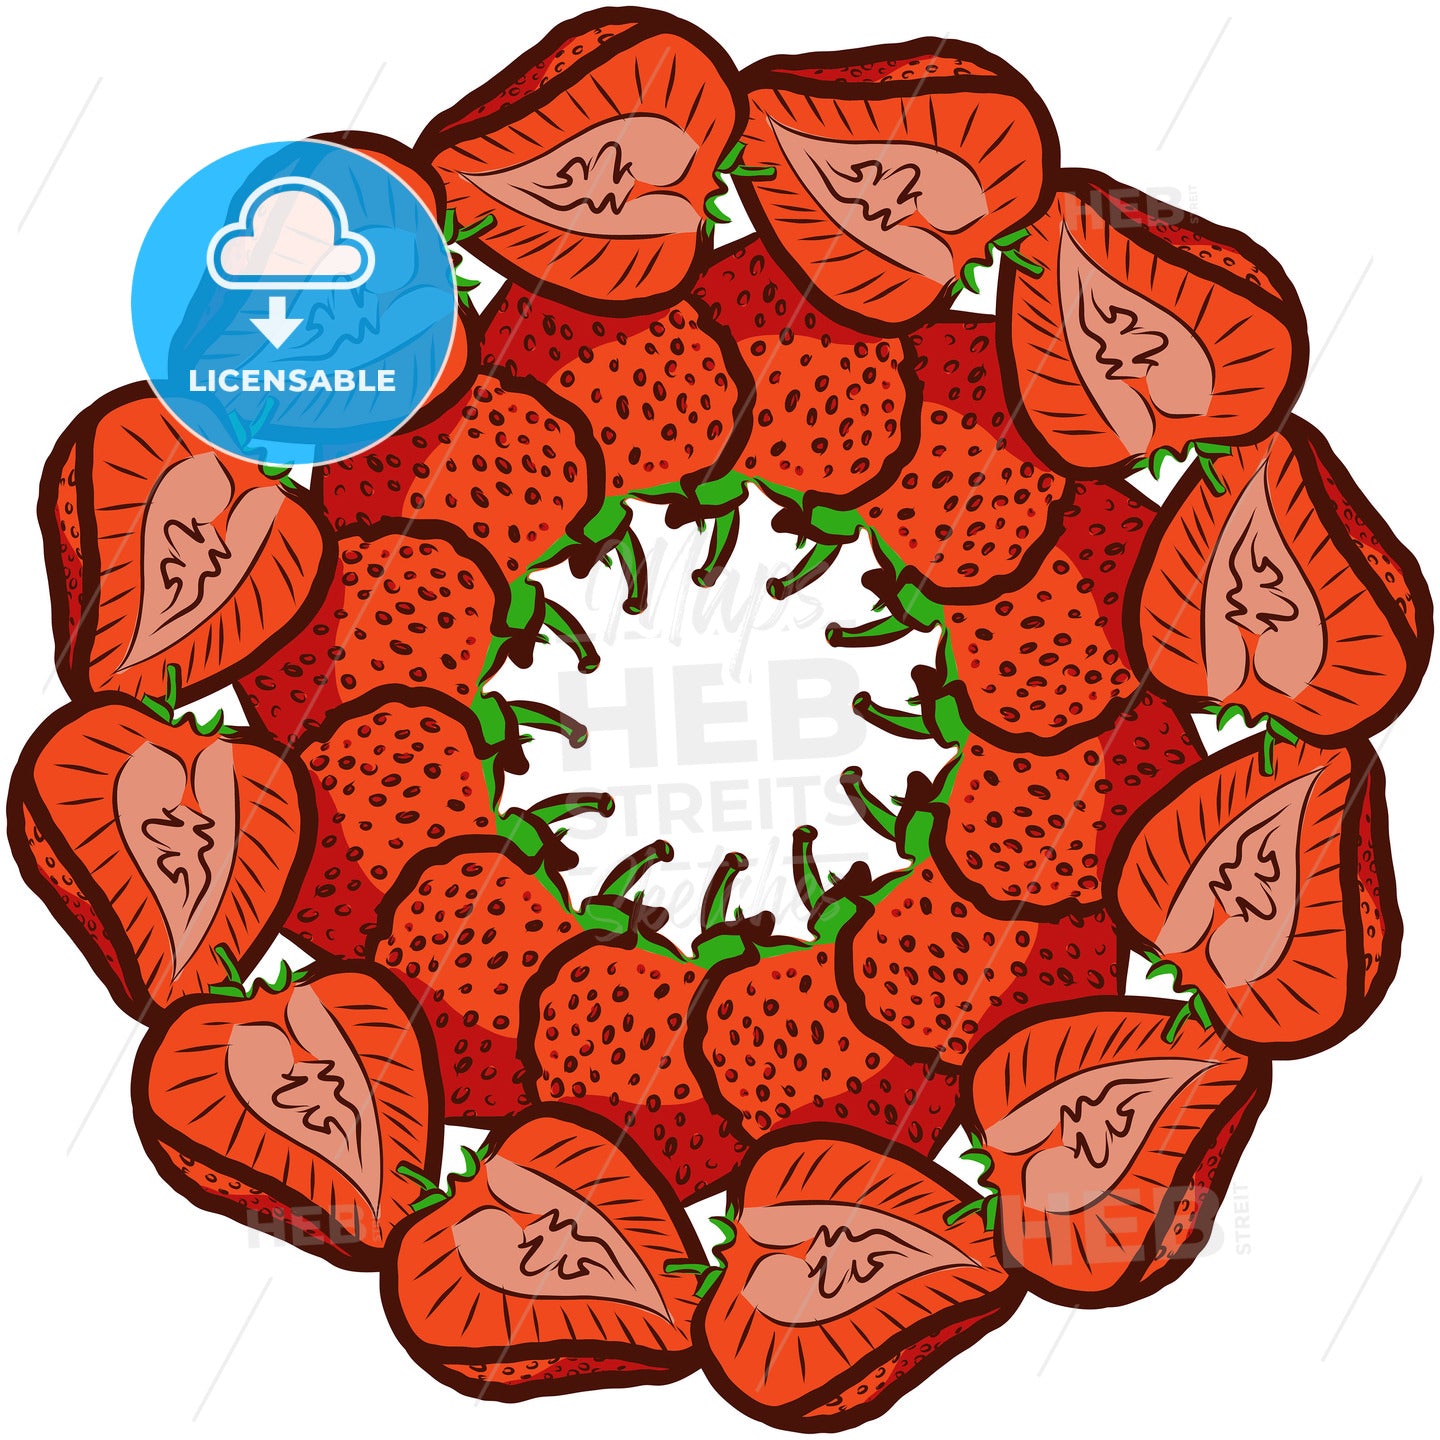 Many strawberries arranged in a circle on white – instant download